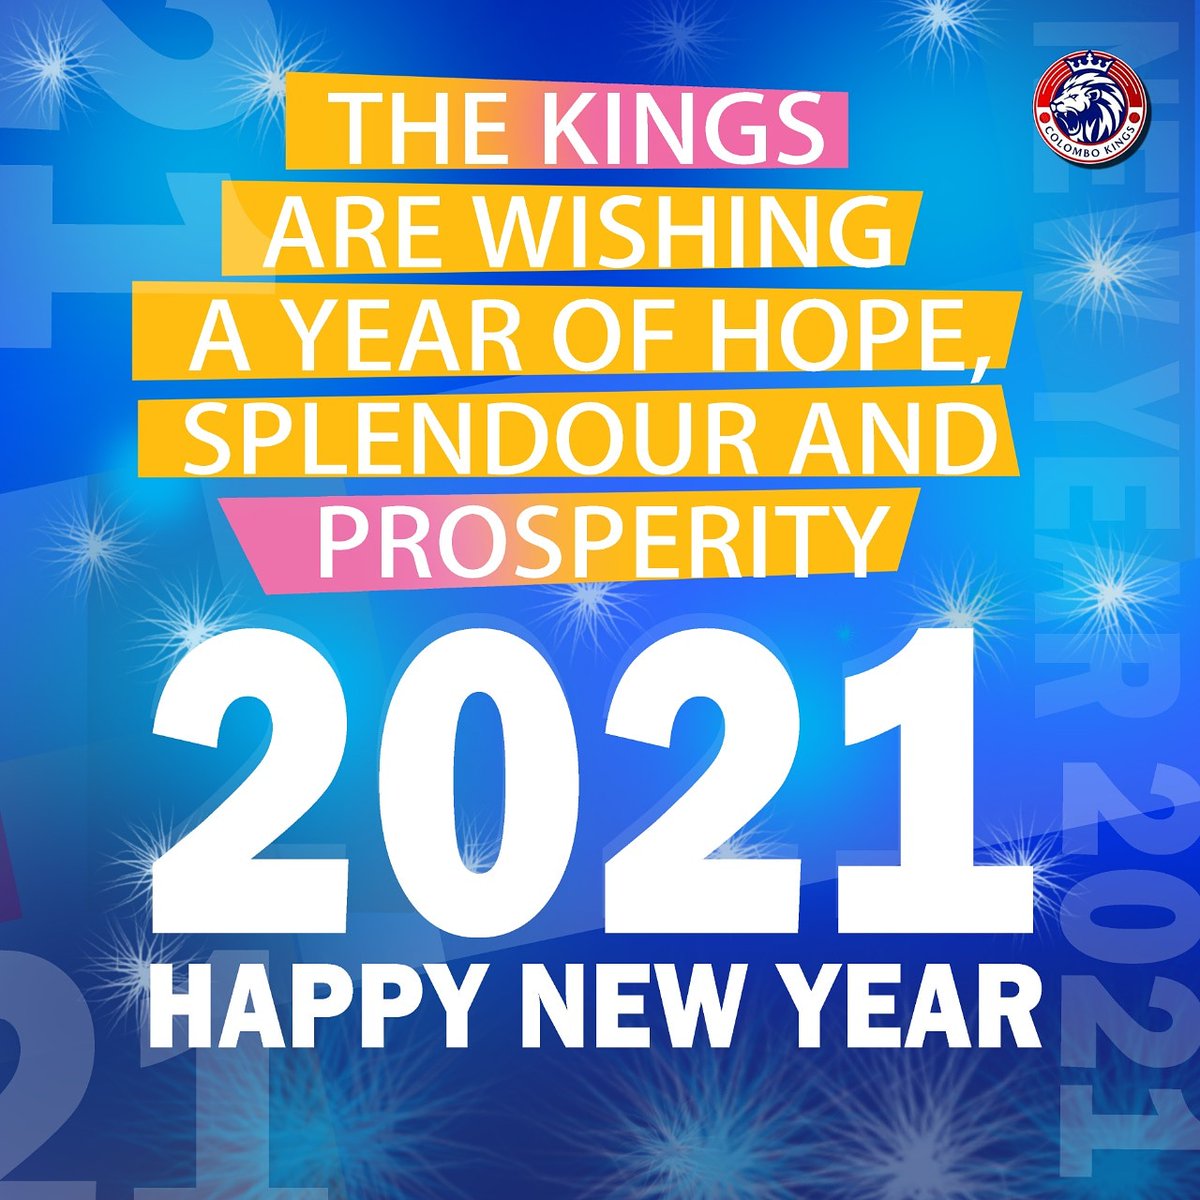 A very warm Happy New Year to all our fans, supporters and well wishers. Let this year fulfill all your dreams and wishes. Let this year be the best of the lot.
#letsrule #letscelebrate #winittogether #colombokings #lpl2020